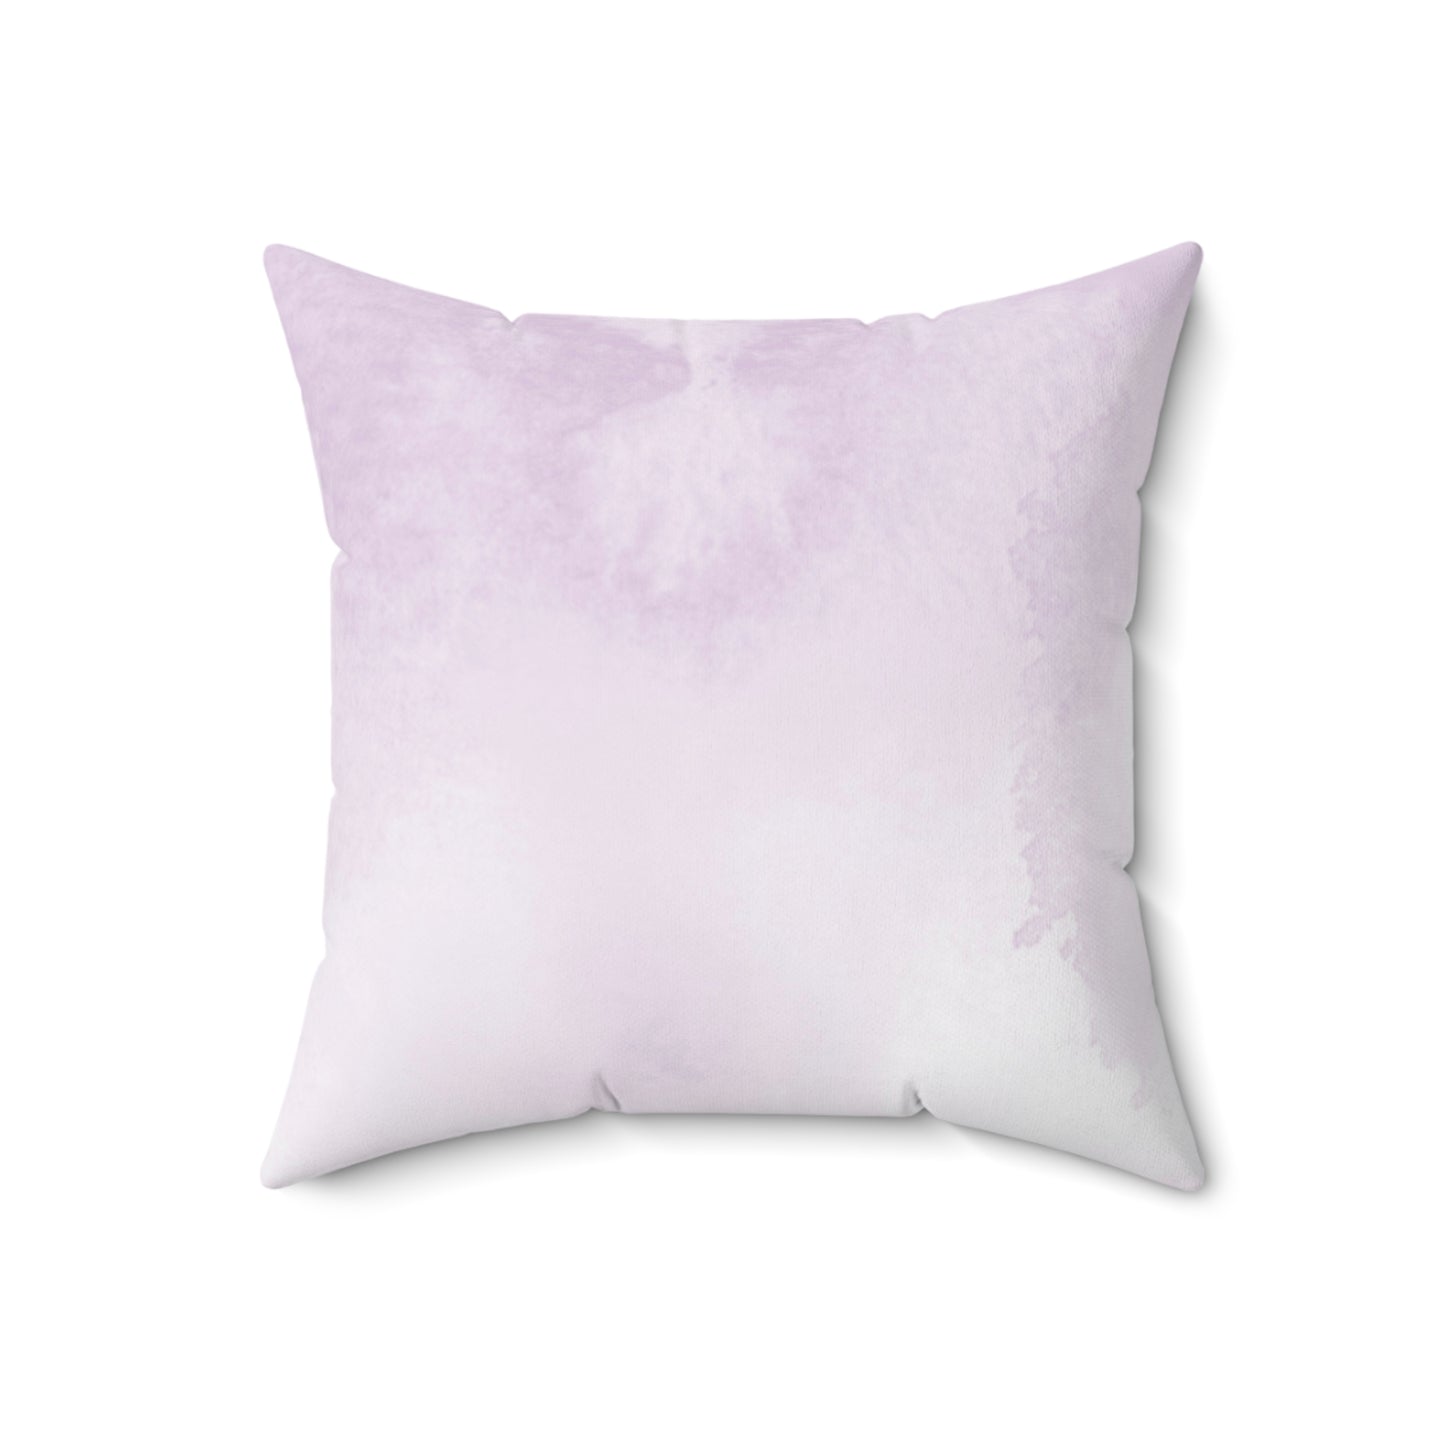 Pink & Purple Lucky Horseshoe Cowgirl Marbled Double Sided Square Pillow - Multiple Sizes